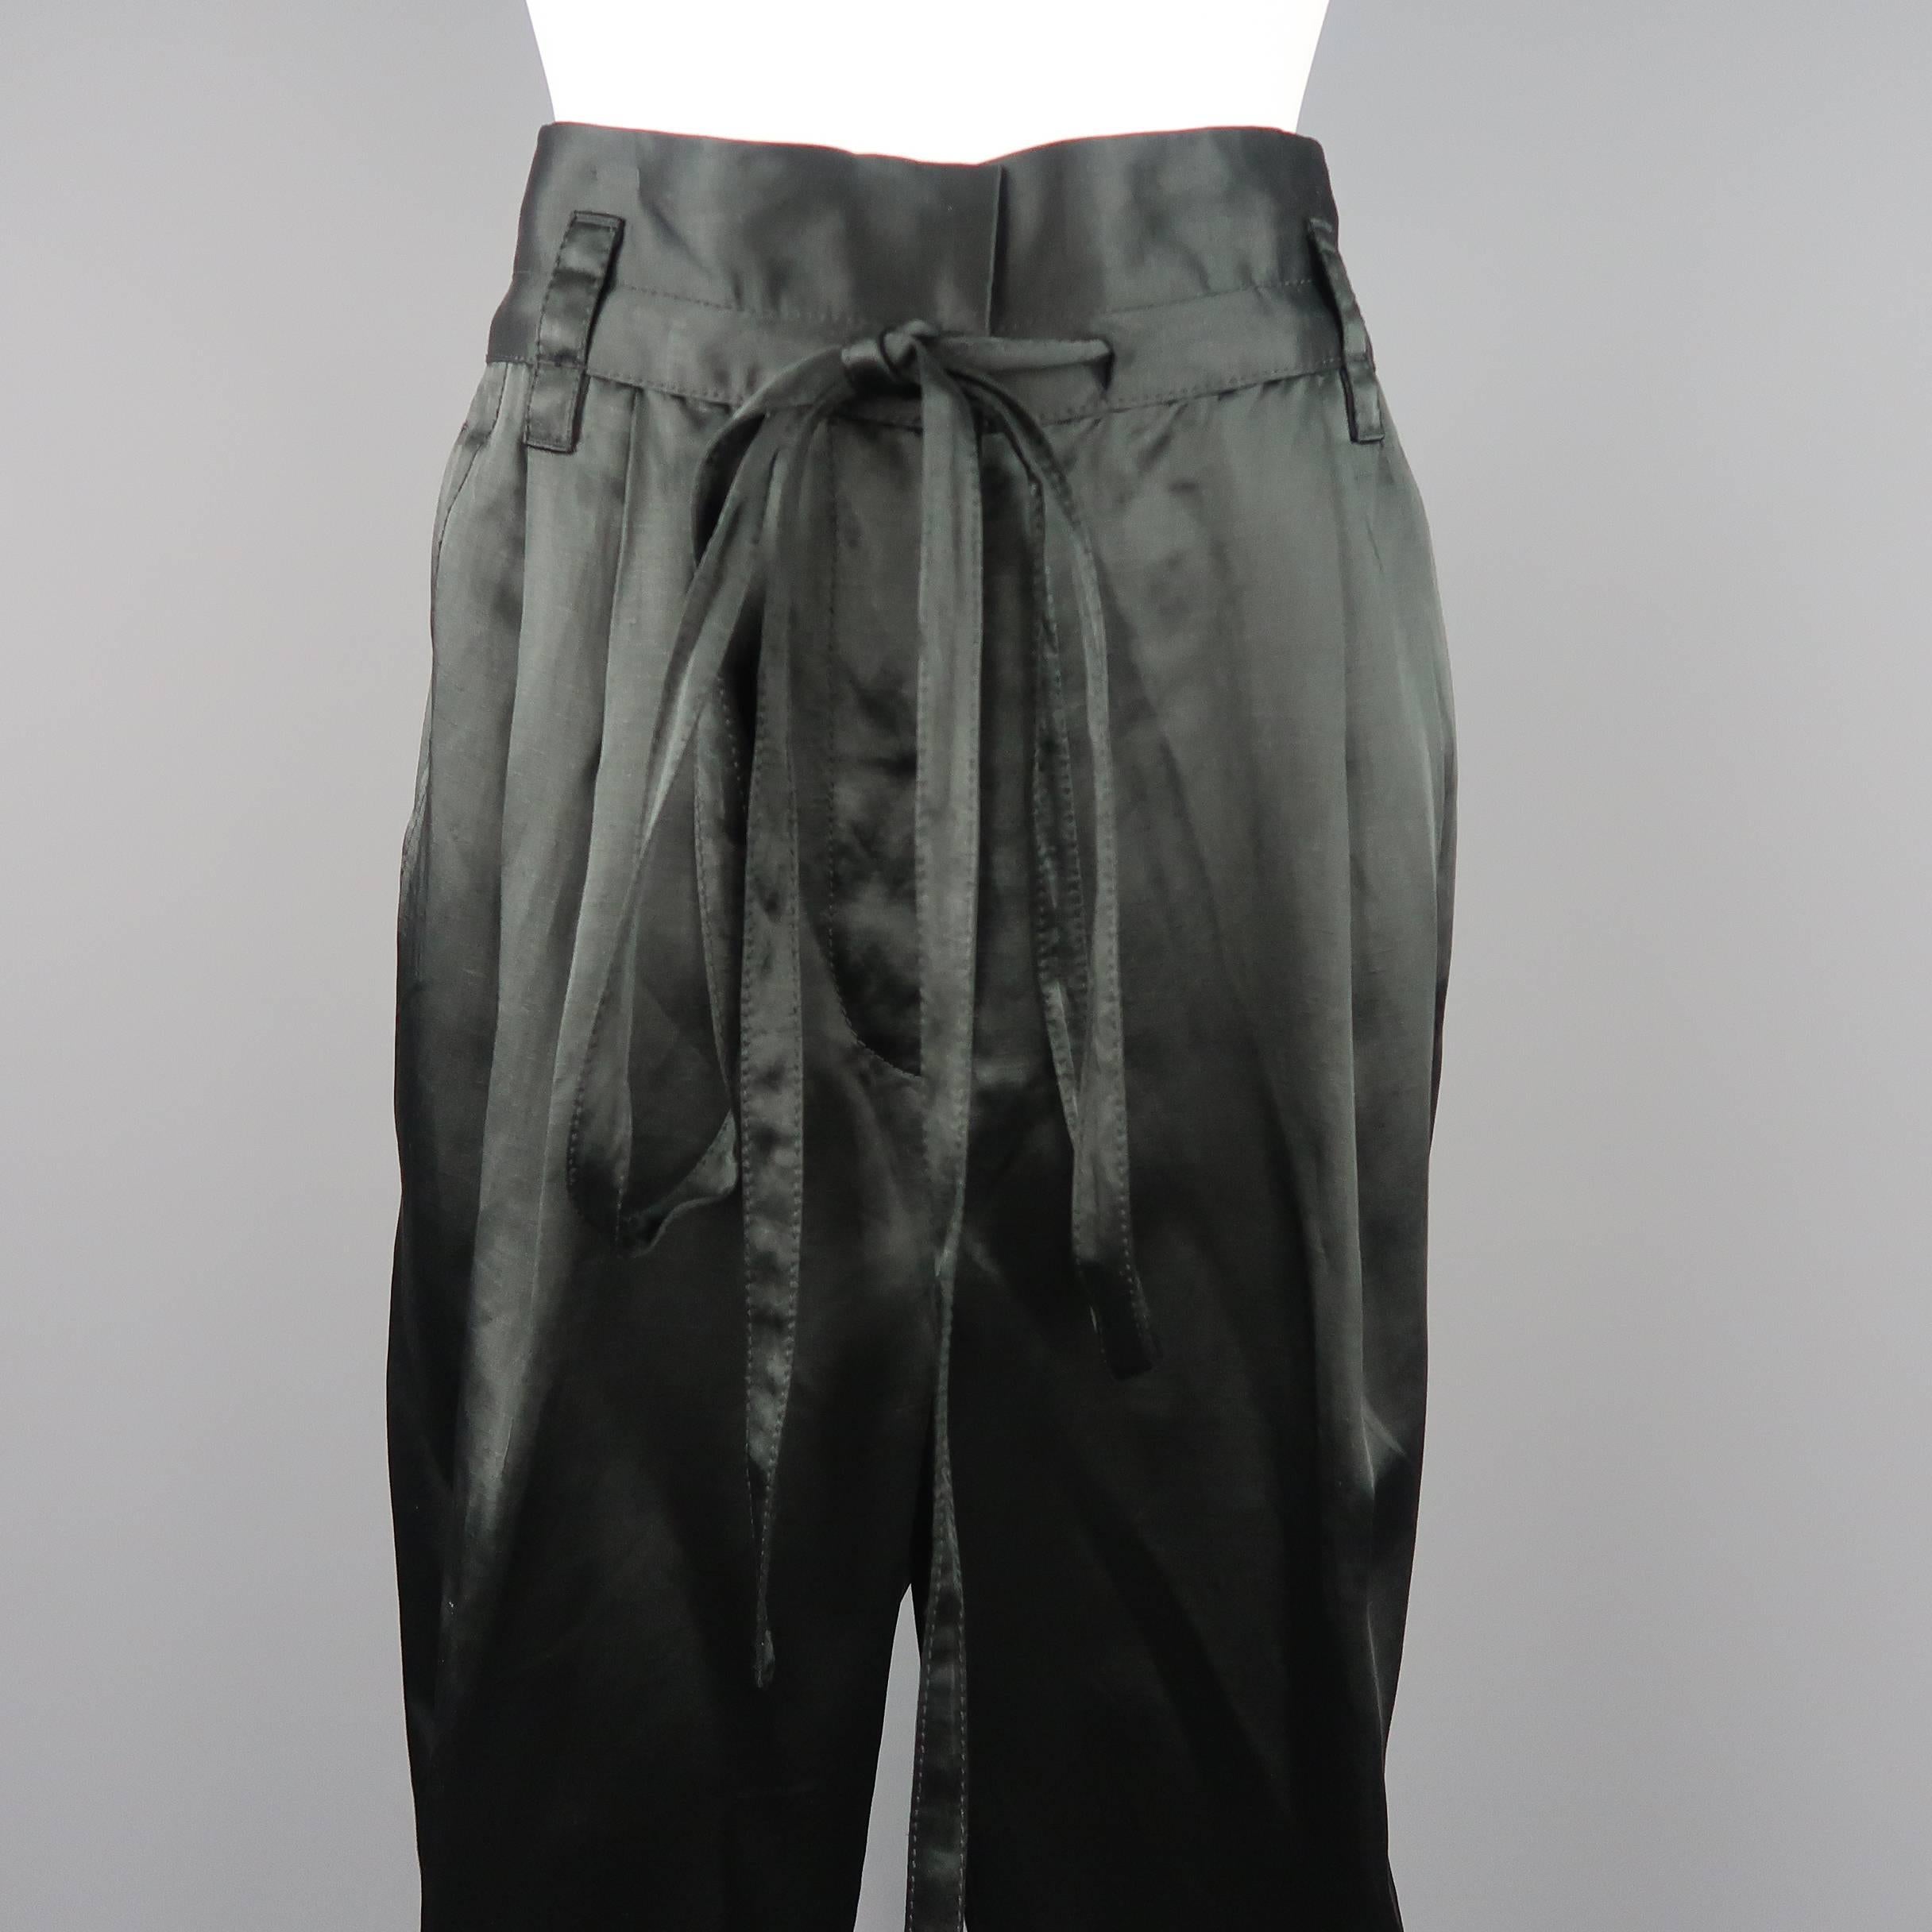 MARC JACOBS trousers come in a dark green black linen blend satin with a double pleat, drawstring waistband, and cuffed hem. Made in USA.
 
Good Pre-Owned Condition.
Marked: 4
 
Measurements:
 
Waist: 32 in.
Rise: 15 in.
Inseam: 25 in.
